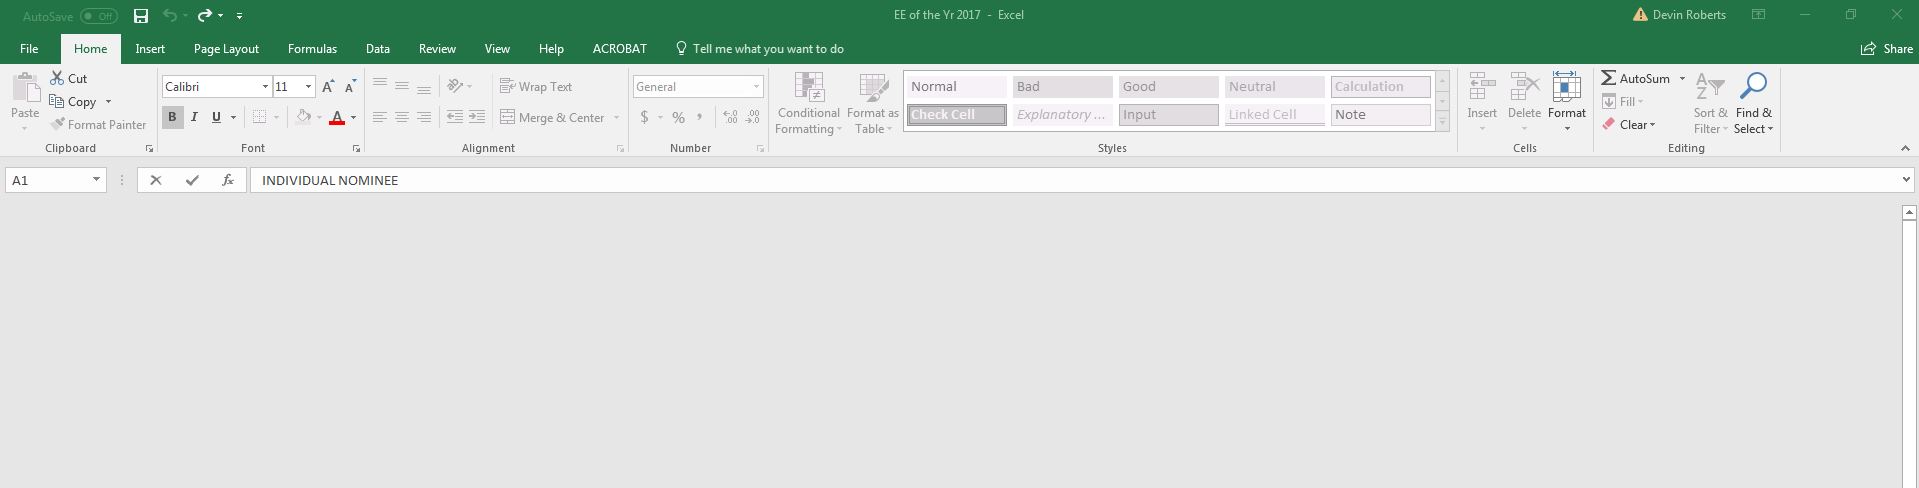 excel worksheet disappears when entering data from the page layout microsoft community